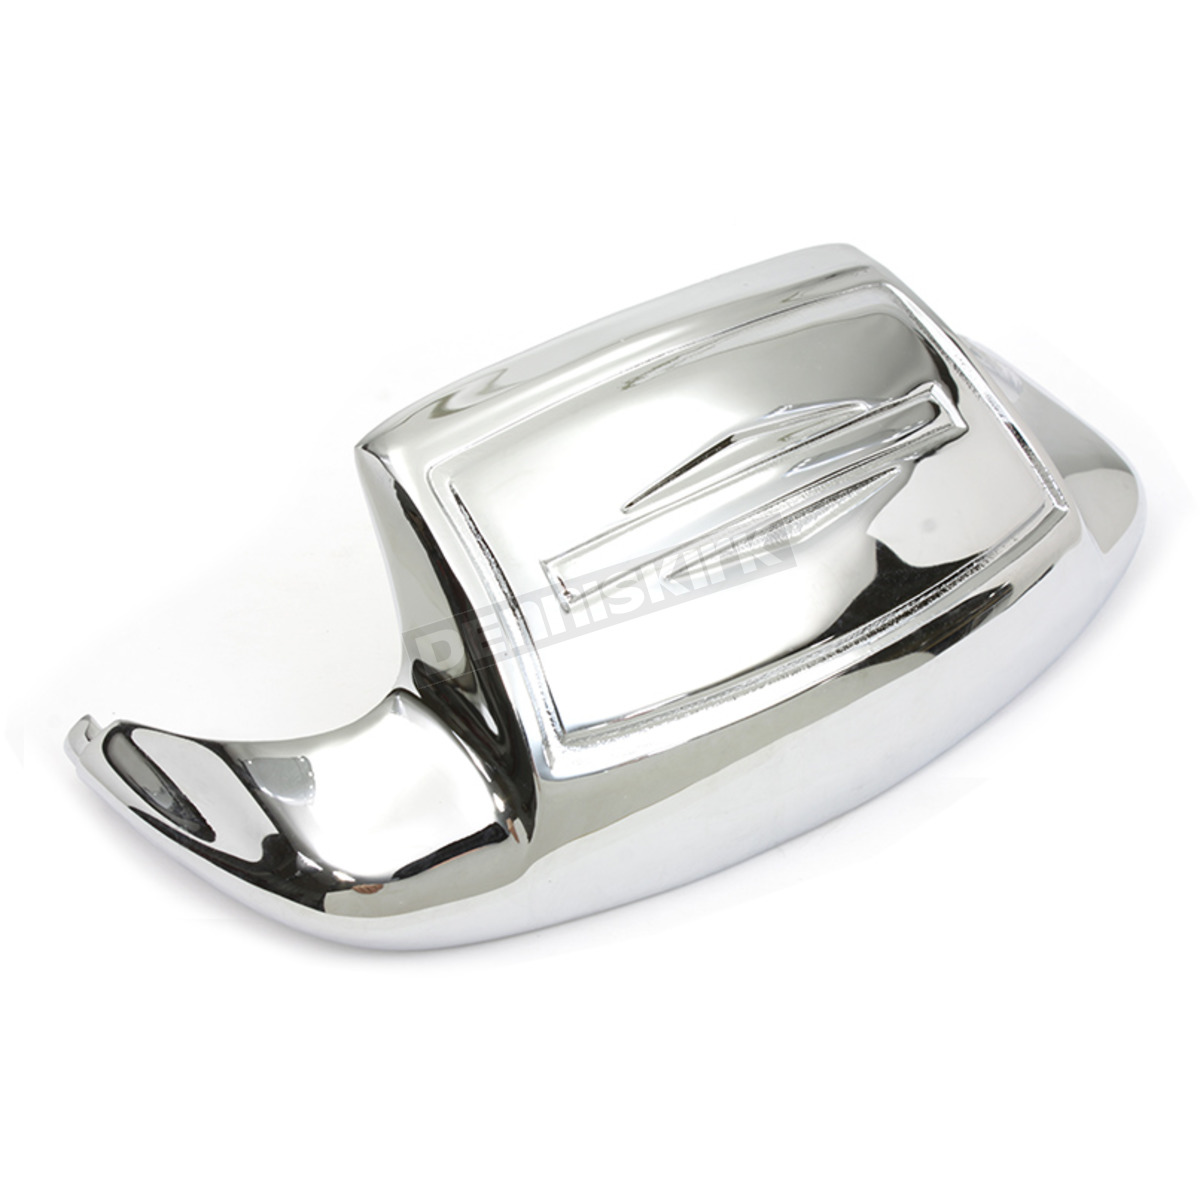 Chrome Rear Fender Tip fits Harley Davidson motorcycles by V-Twin